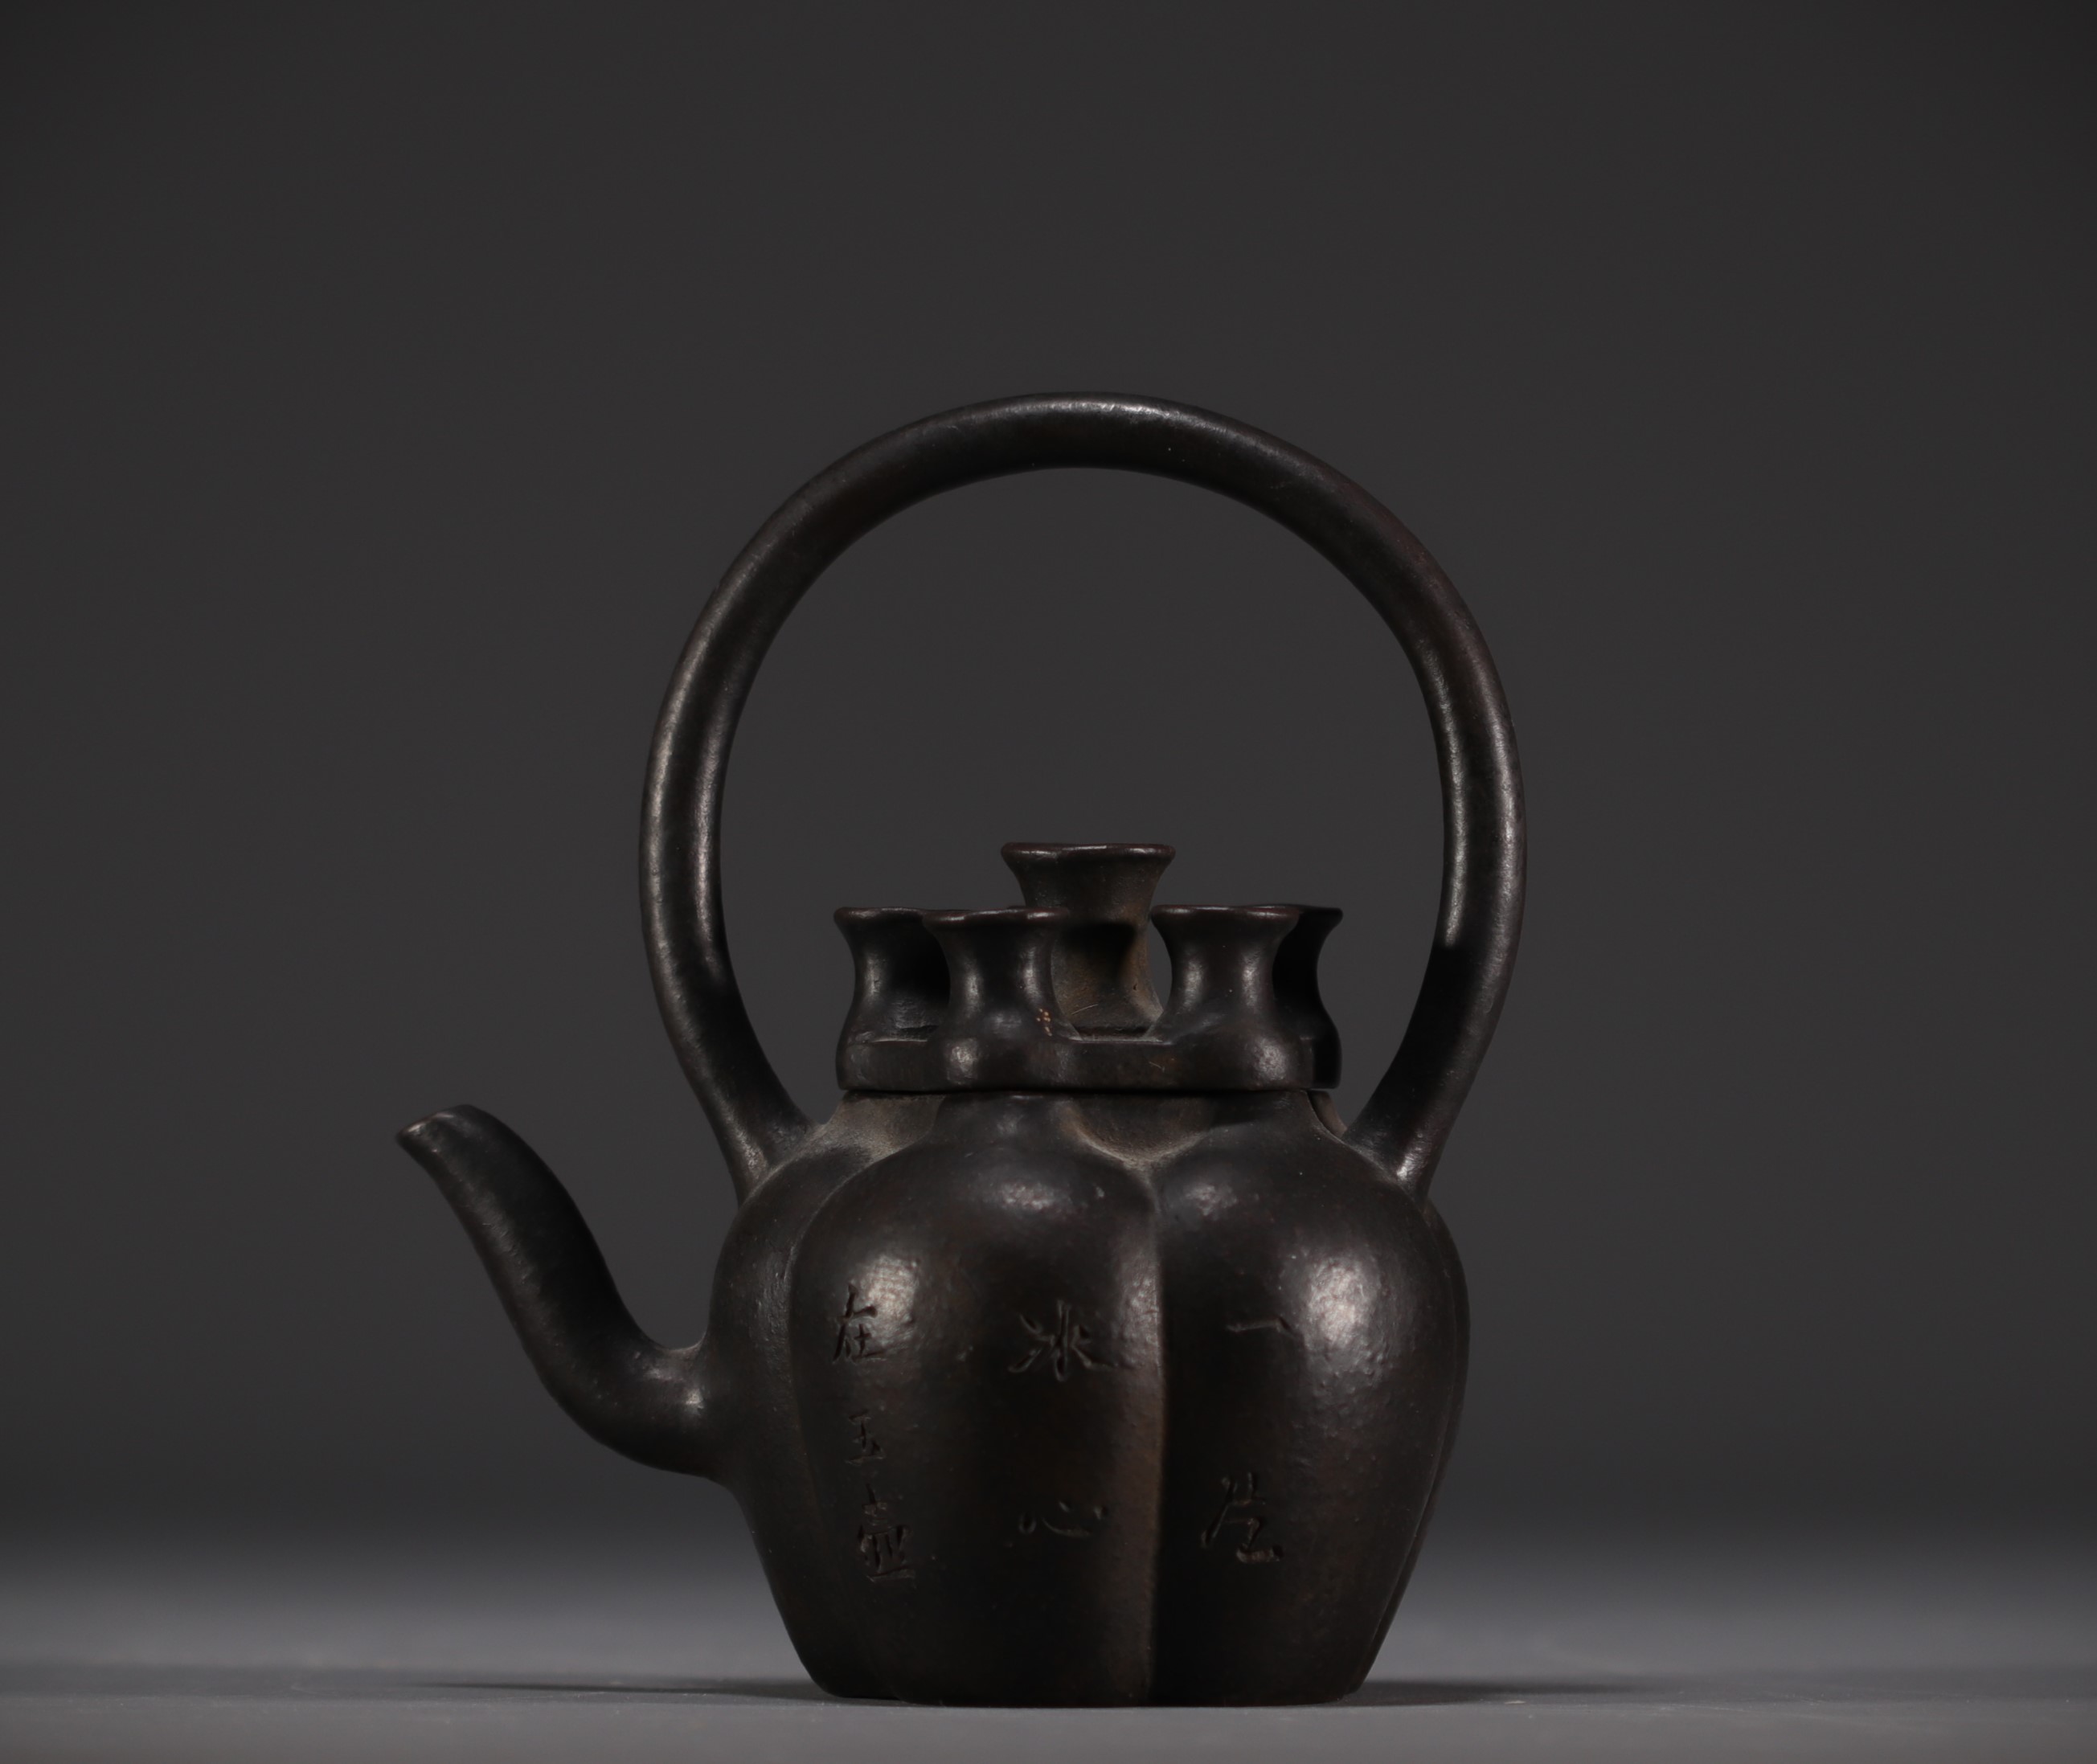 China - Cast iron teapot, calligraphic poem, Ming mark under the piece.